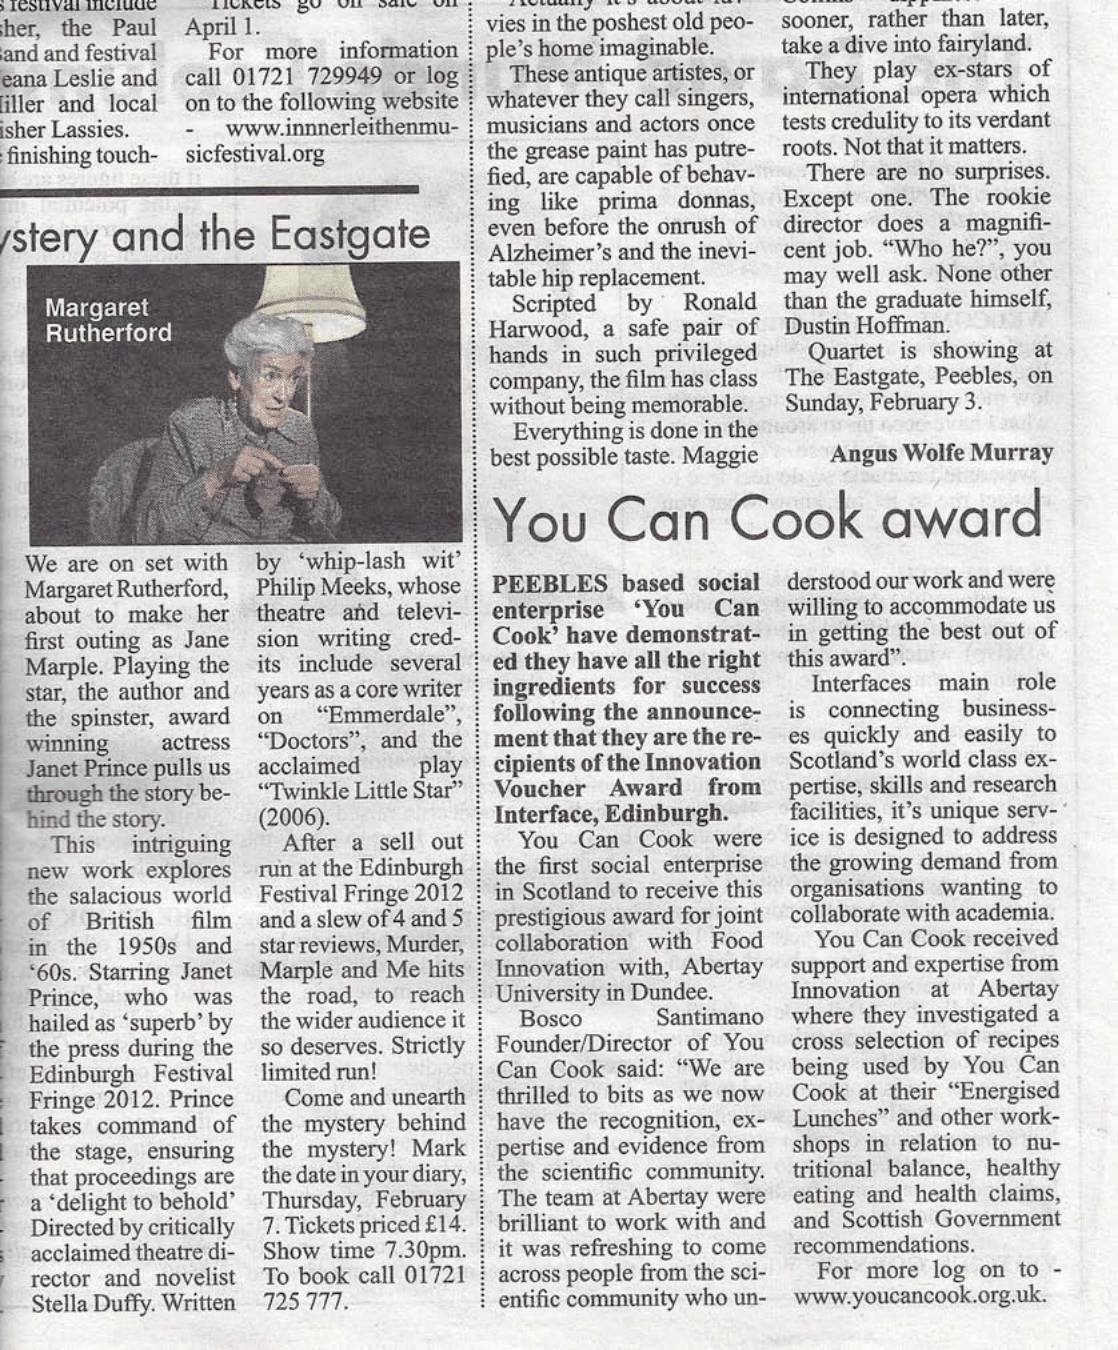 Press Clipping: You Can Cook award